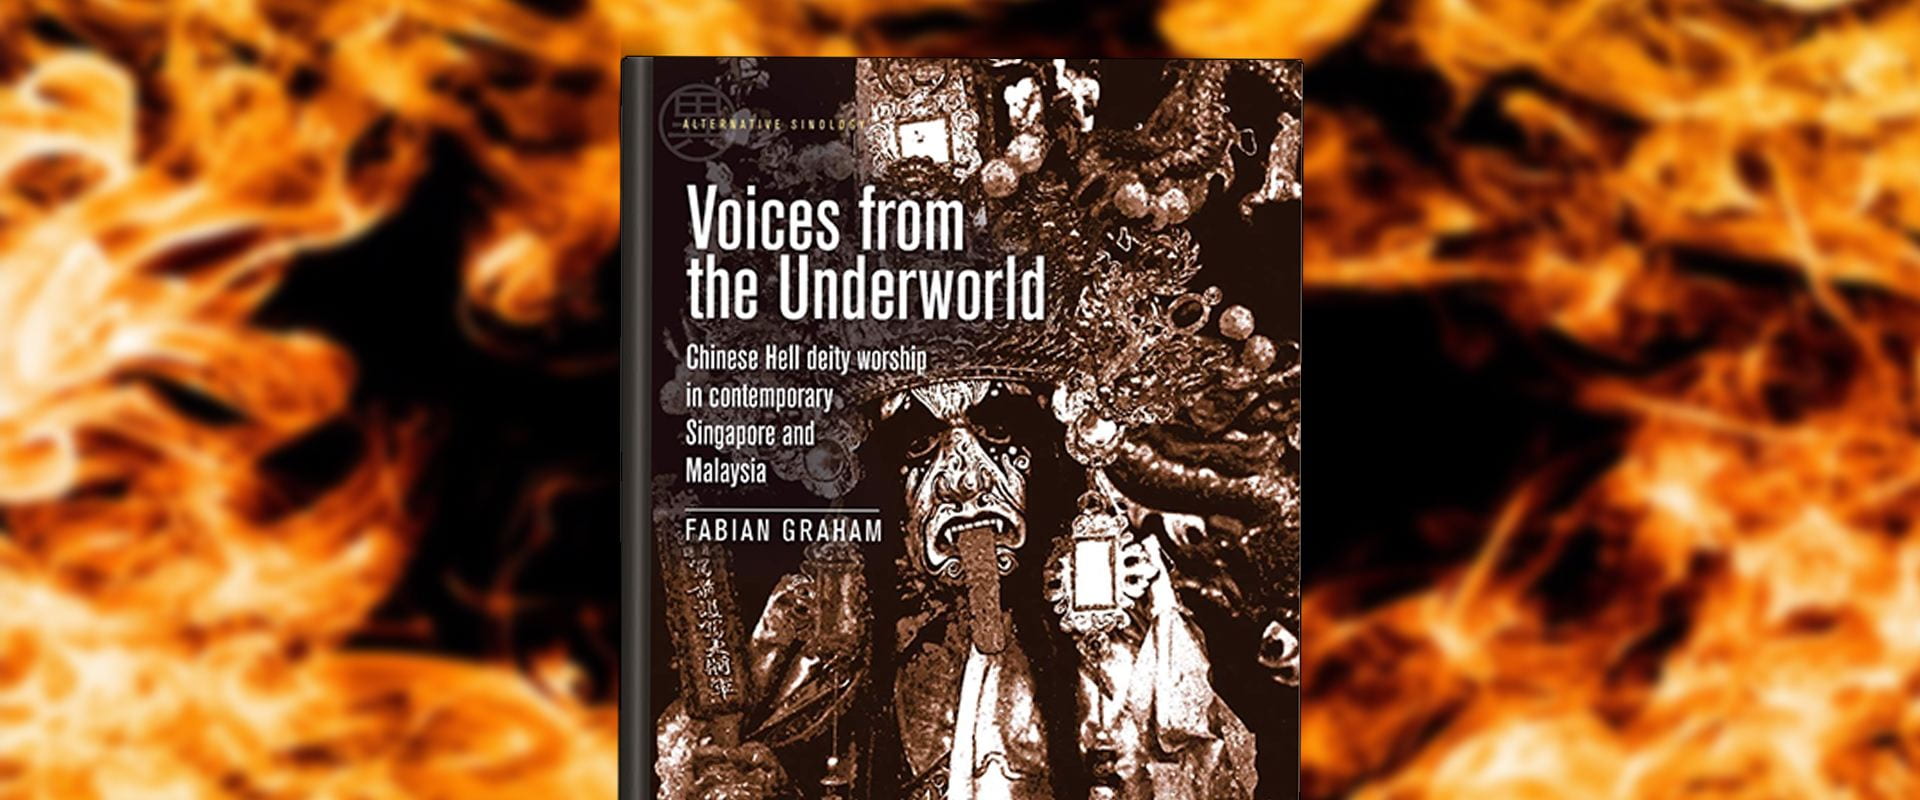 Voices from the Underworld Book Cover: